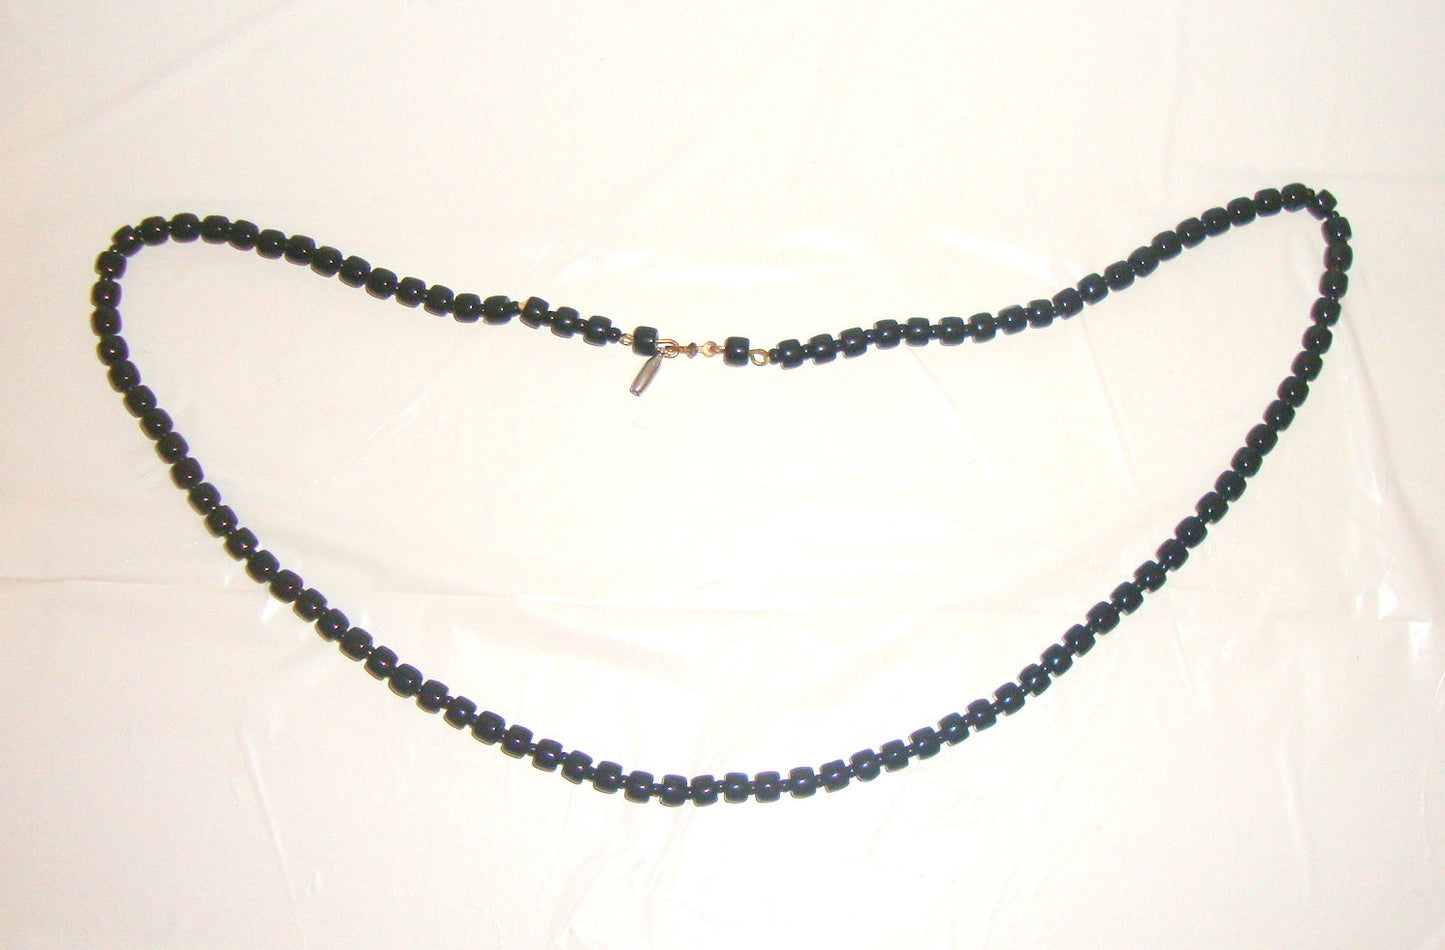 BLACK BEAD GEMSTONE NECKLACE CAN BE DOUBLED FOR BRACELET UNISEX LENGTH 24"